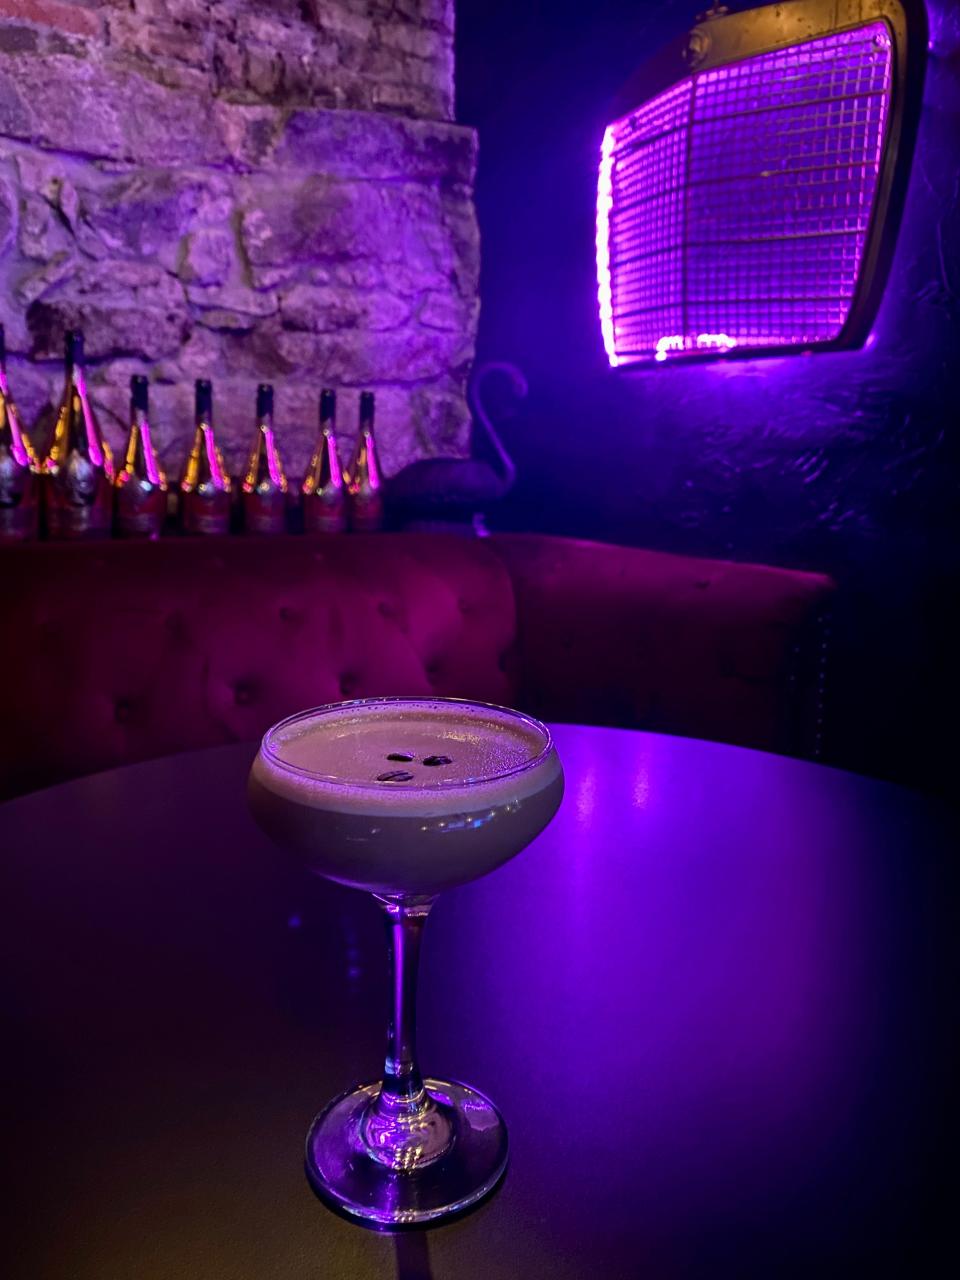 Valentinos' club-like atmosphere provides the perfect backdrop for its classic espresso martini.